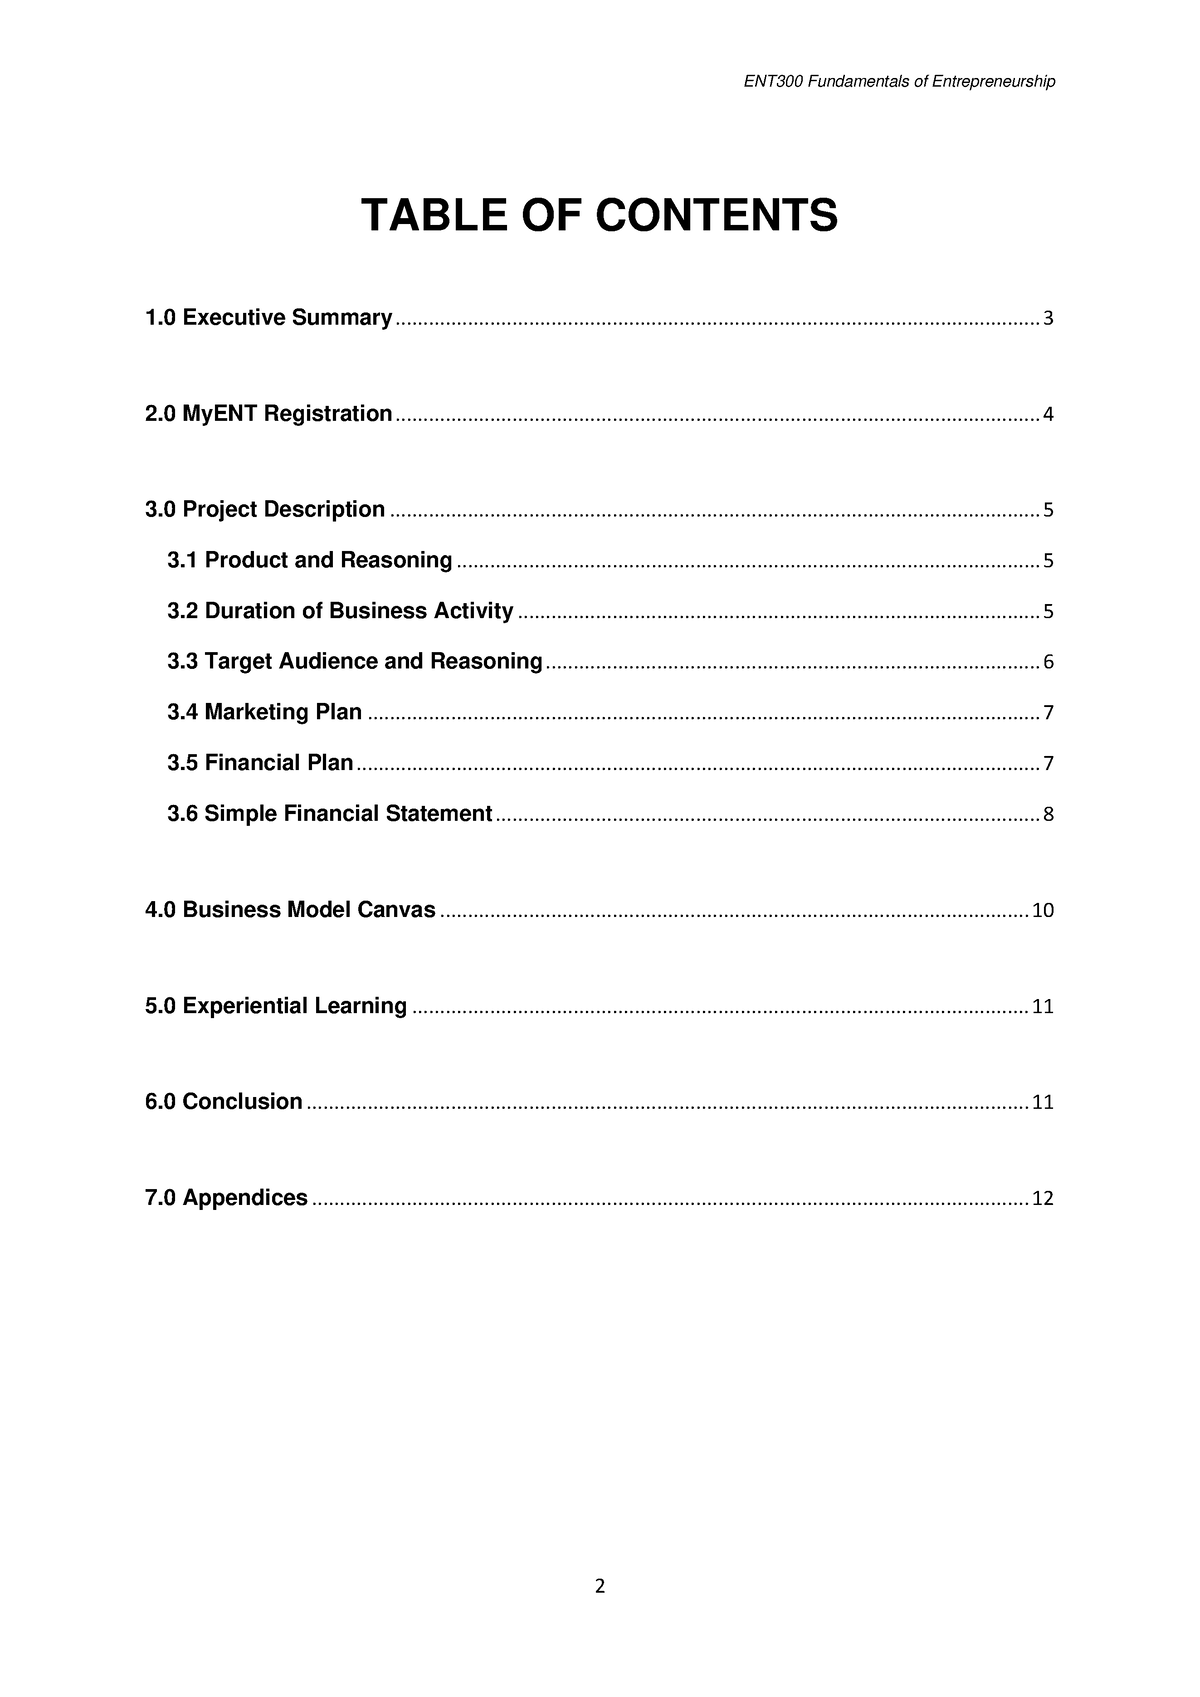 ent300 individual assignment executive summary